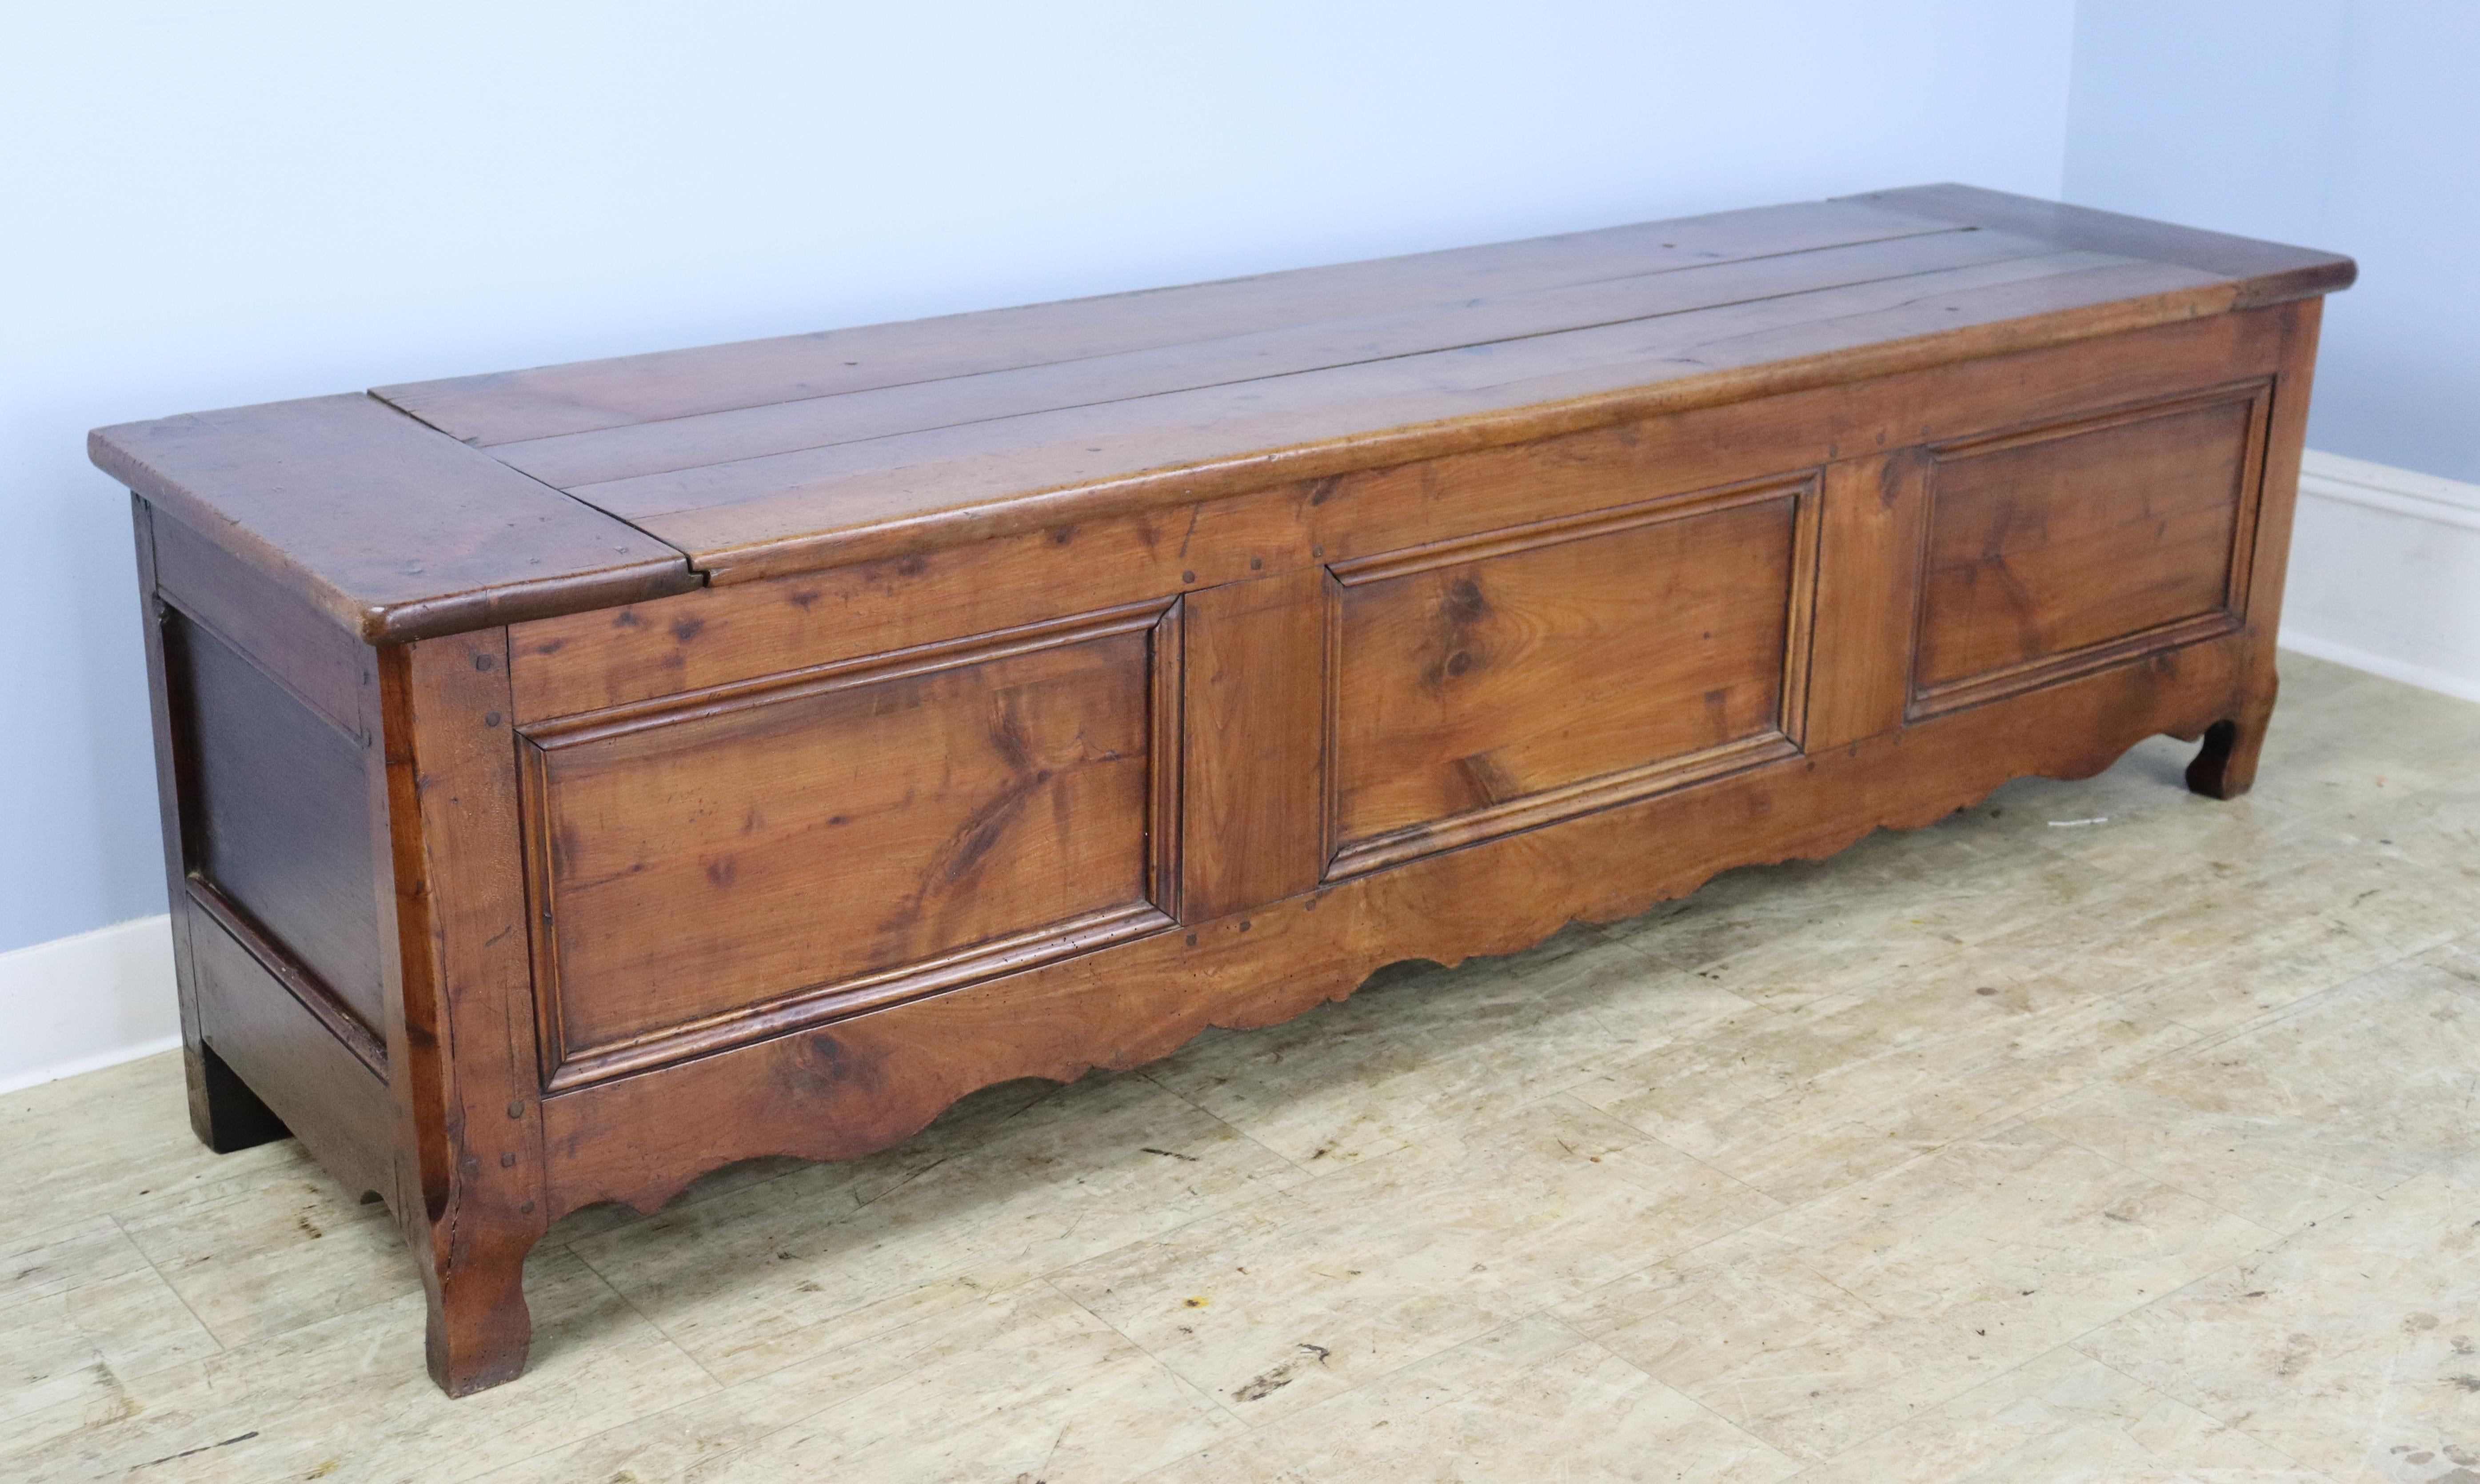 A pretty cherry coffer or bench with a removable (non-attached) top and plenty of storage within. Charming carved apron and good color and patina. This piece would be right in the end of a bed in the entrance hall or well-appointed mudroom.